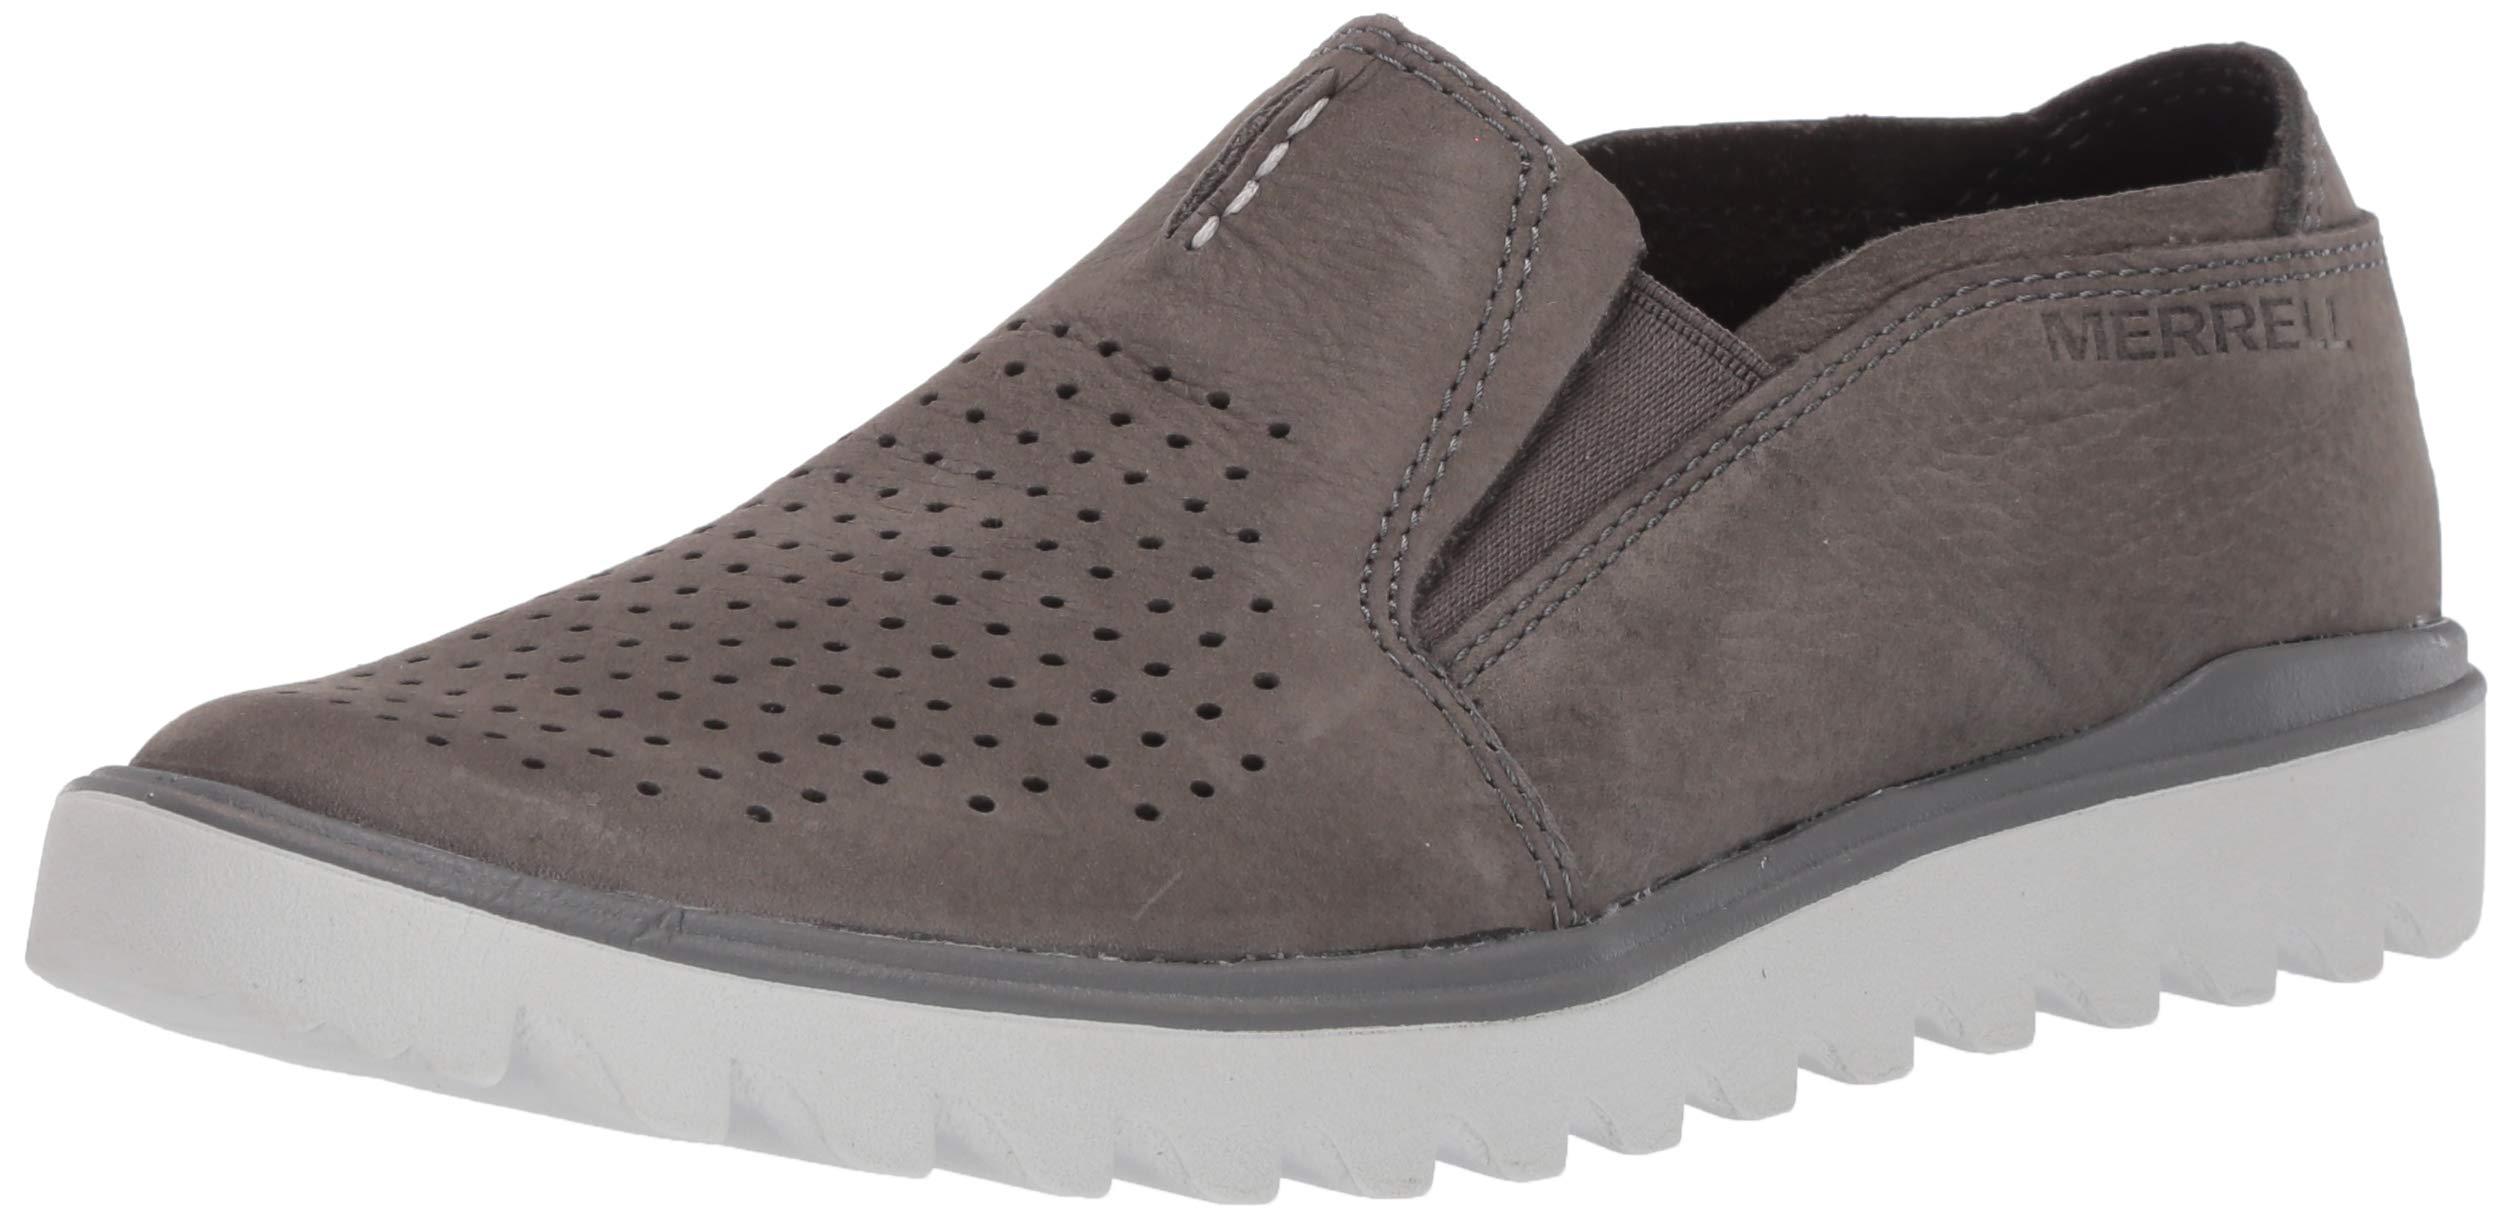 Merrell Leather Downtown Moc in Charcoal (Gray) for Men - Save 30% - Lyst